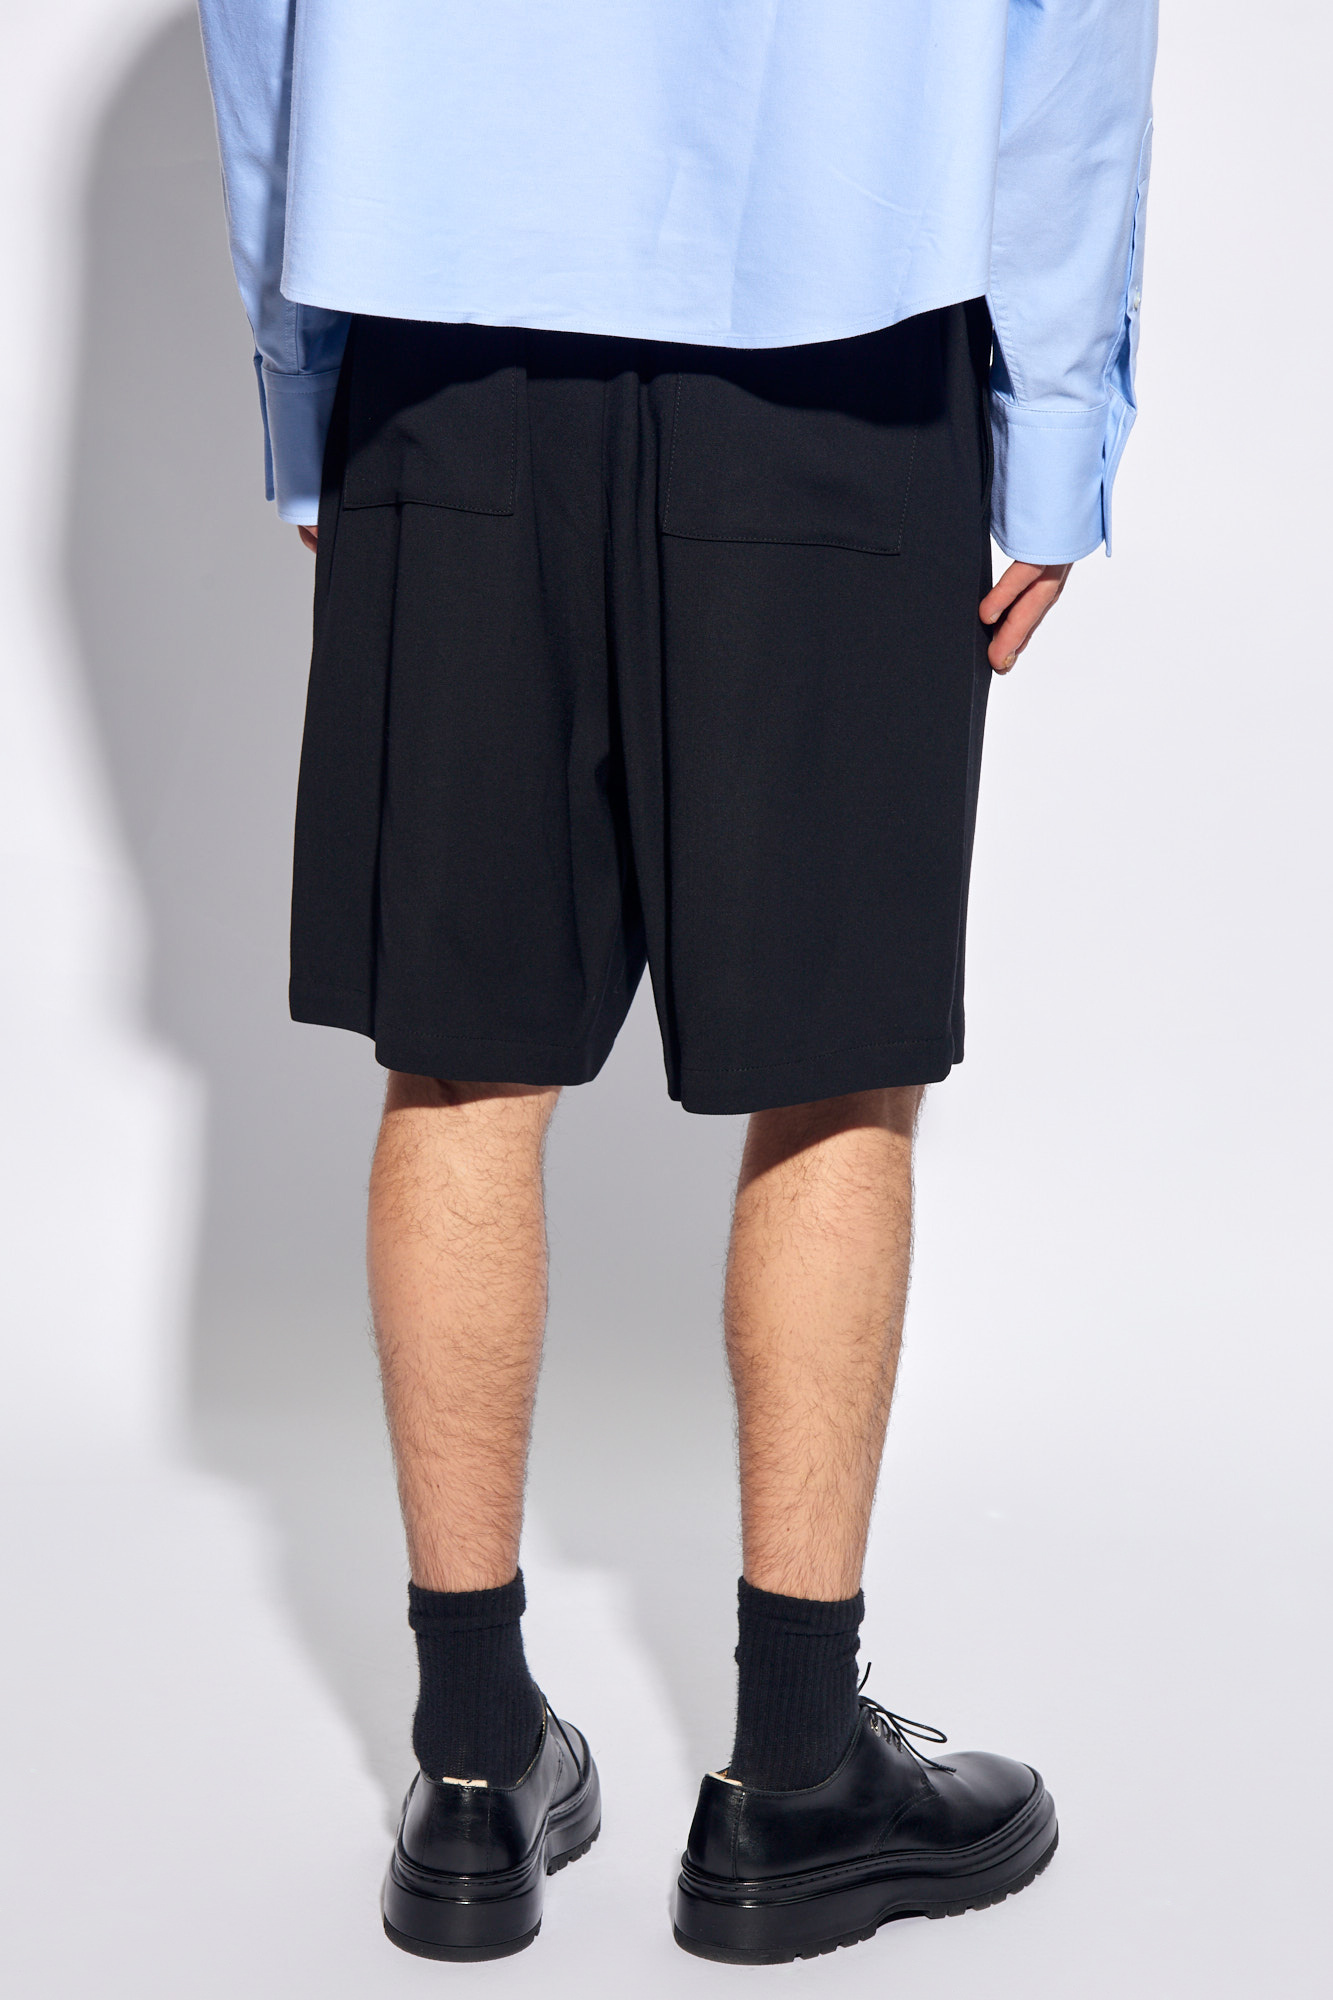 Ami Alexandre Mattiussi Pantacourts shorts with wide legs